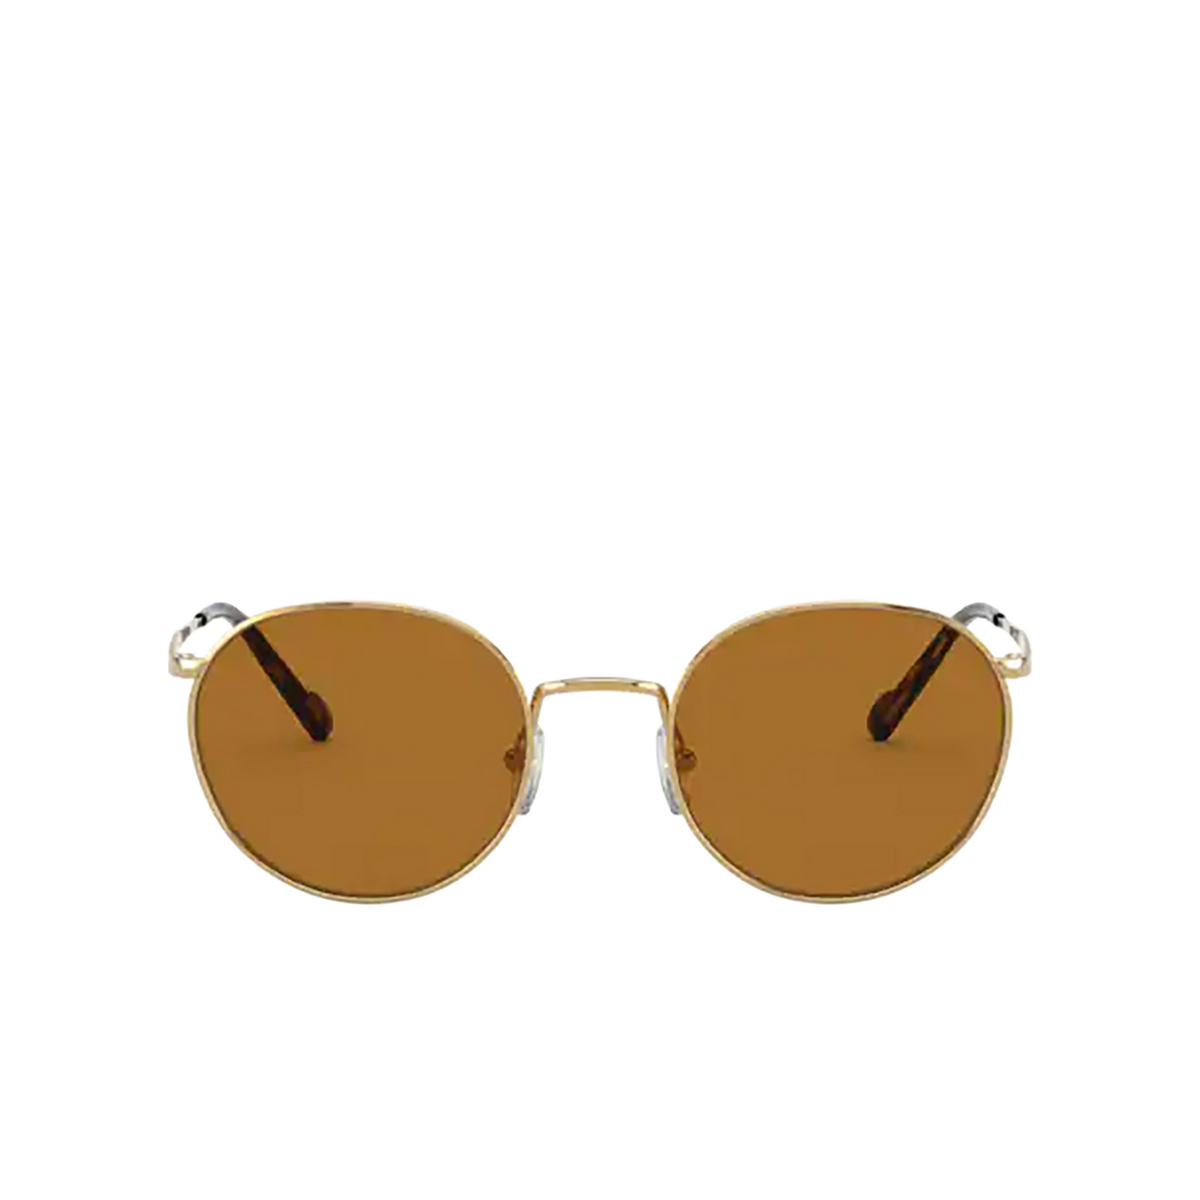 Vogue® Round Sunglasses: VO4182S color Gold 280/83 - front view.